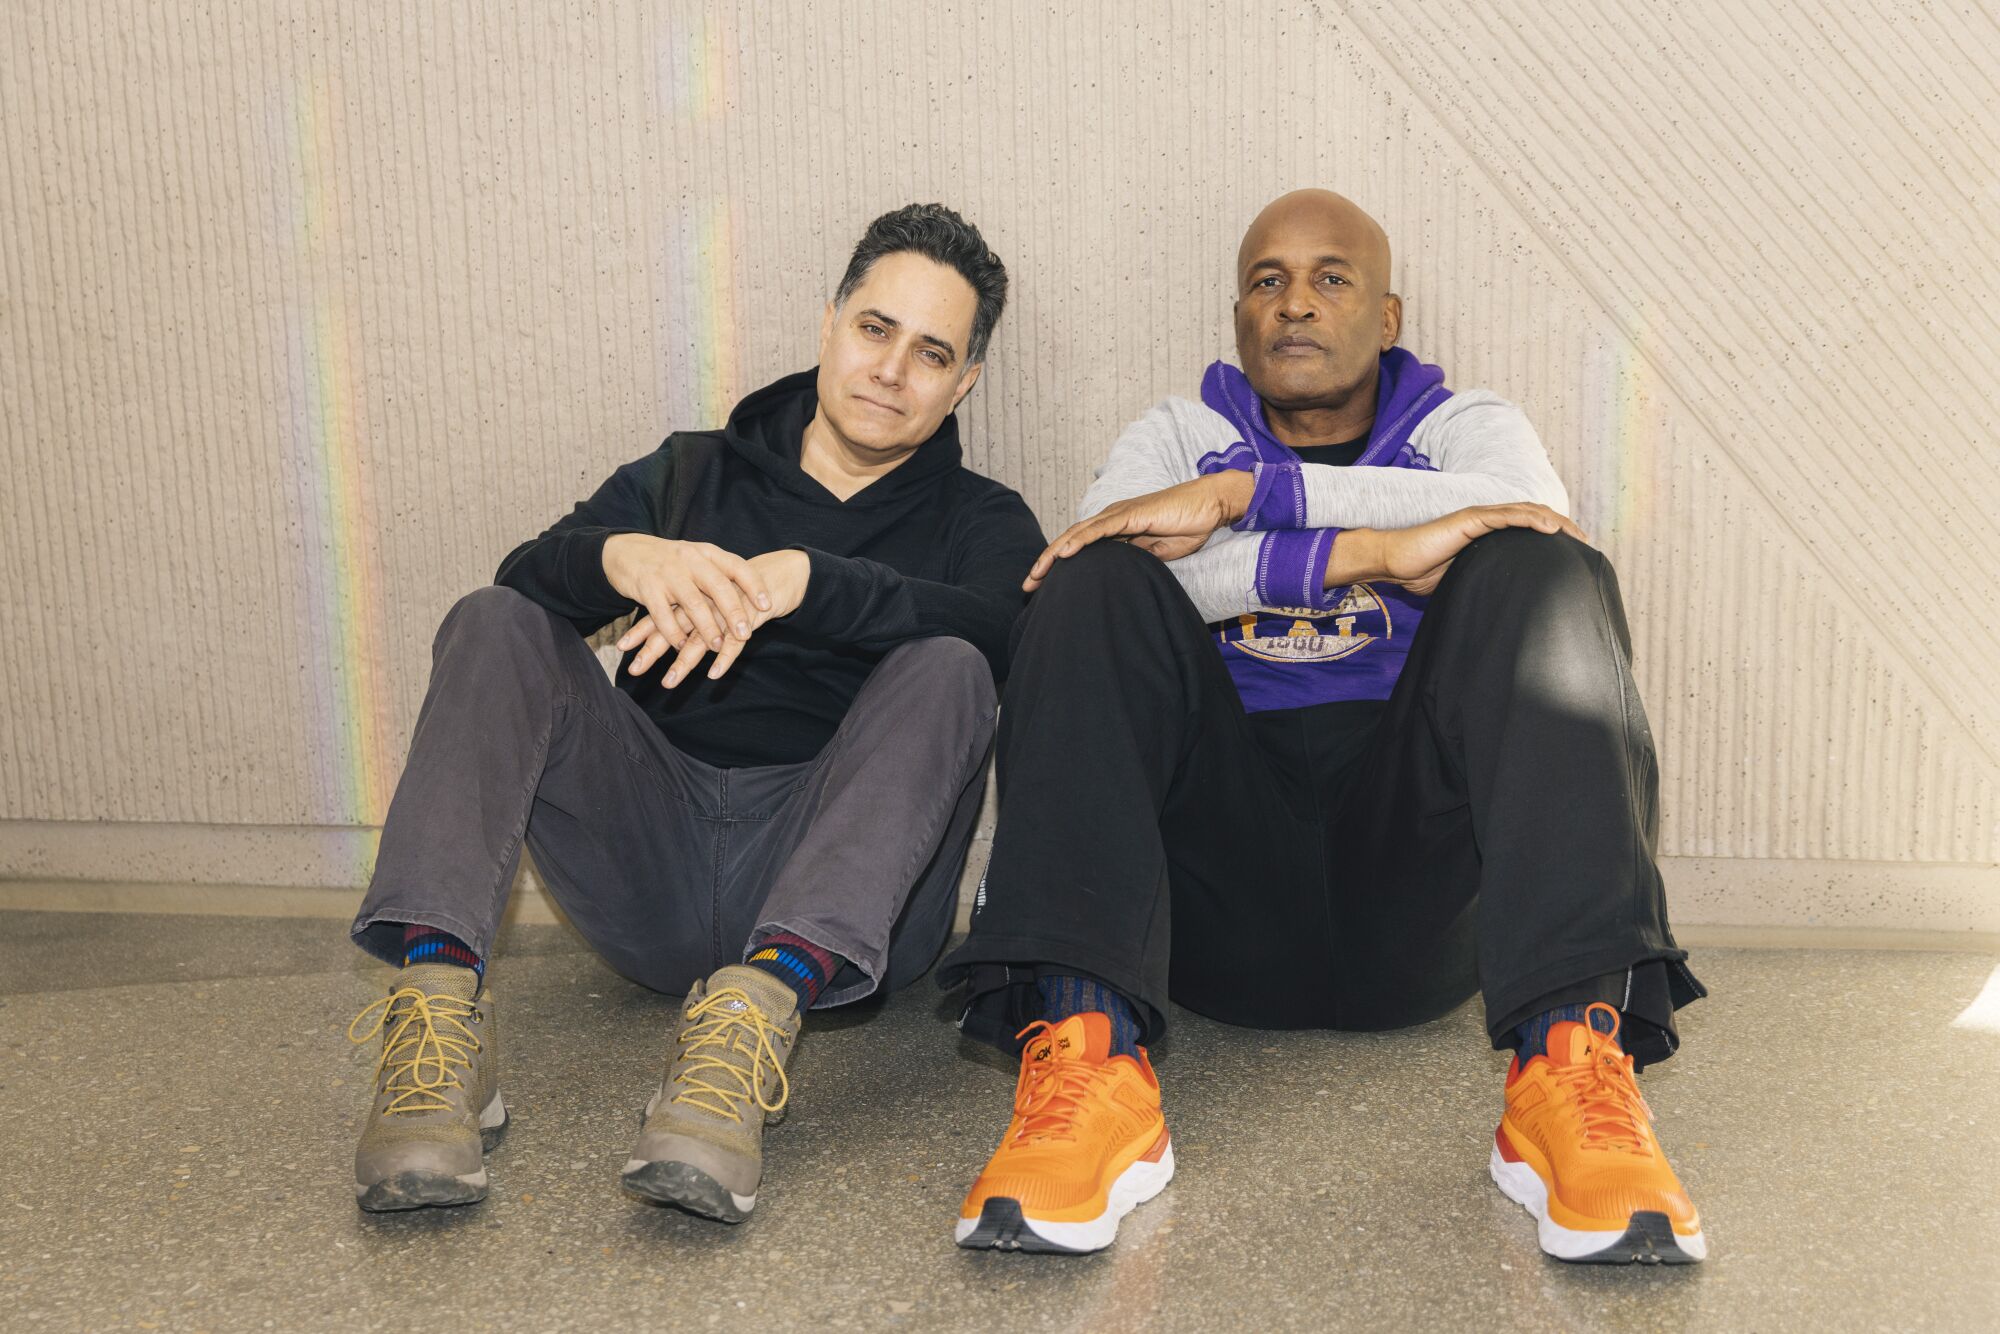 Two men sit on the ground, leaning against a wall.  